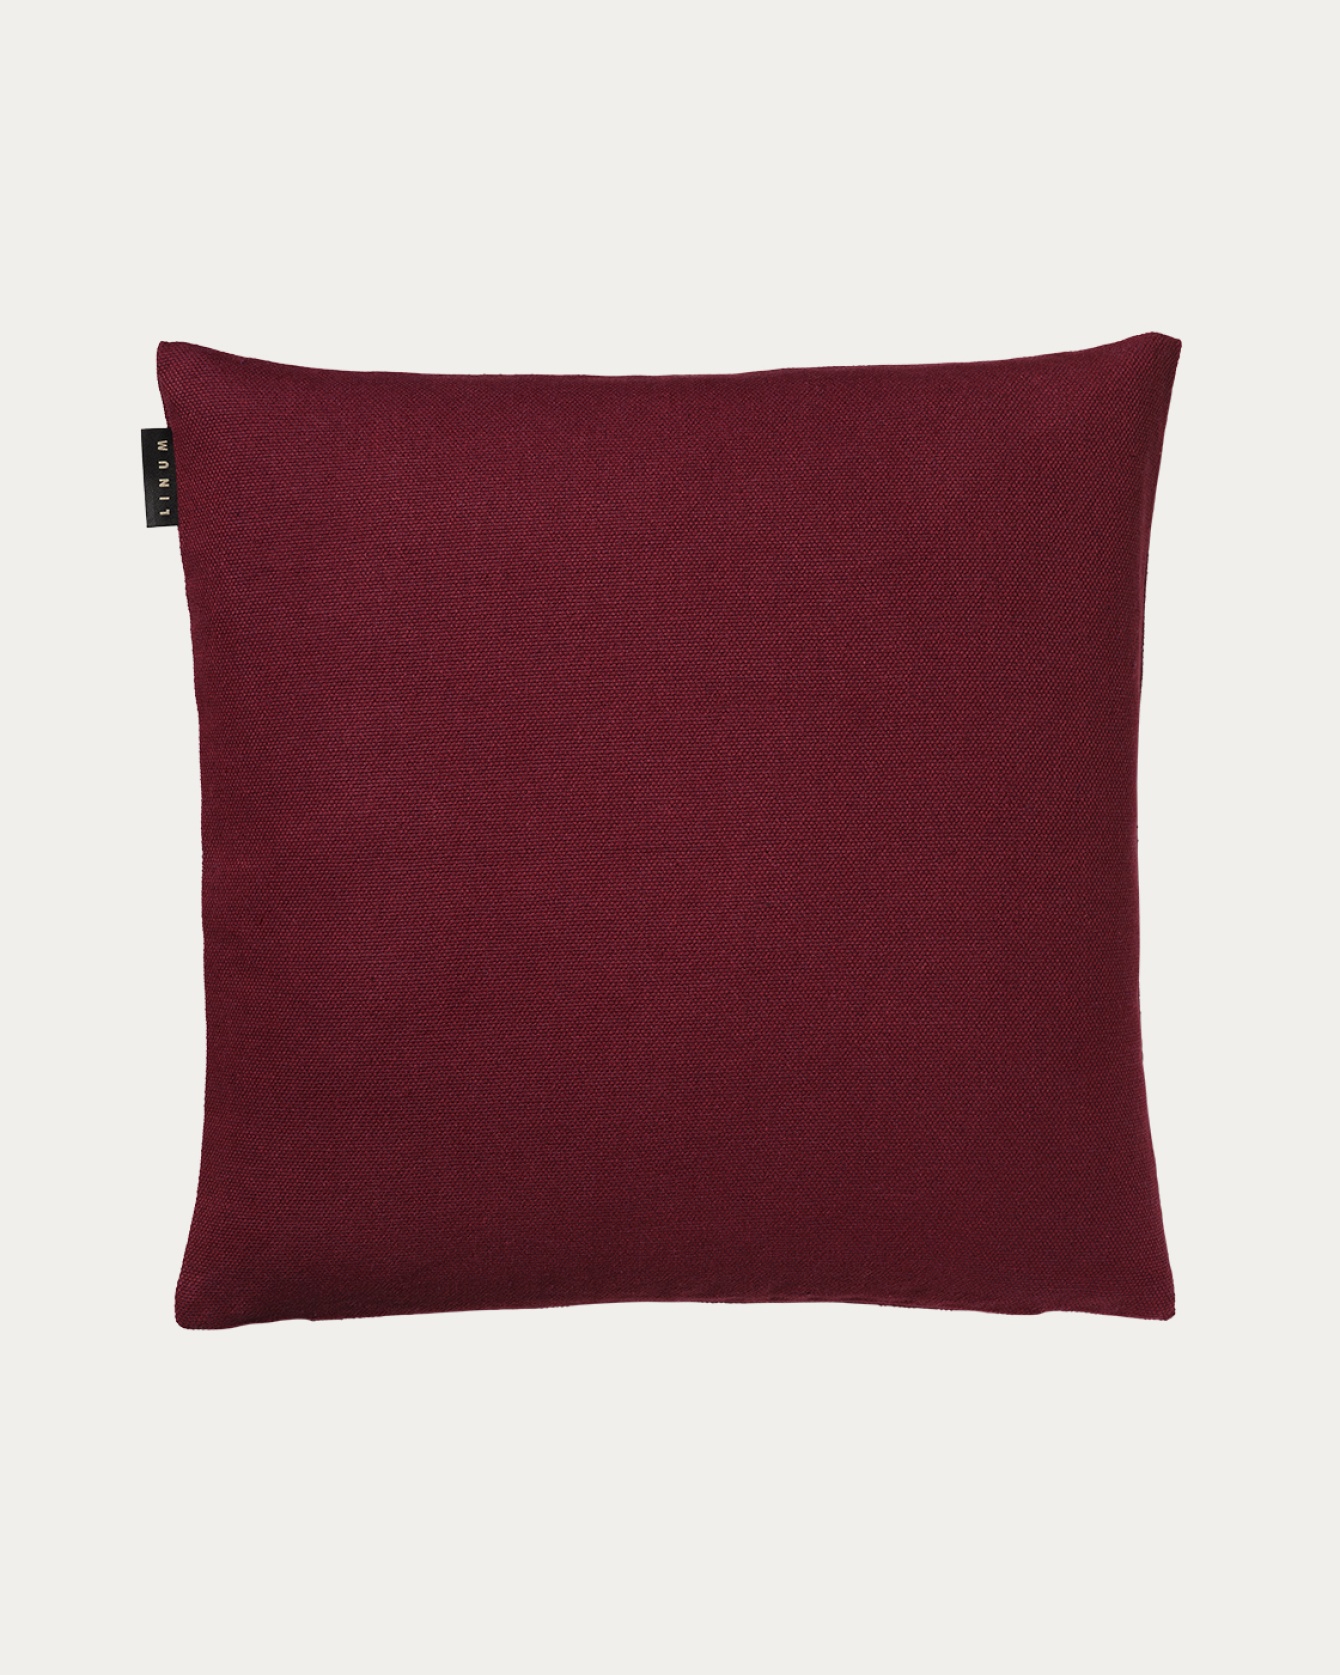 Product image burgundy red PEPPER cushion cover made of soft cotton from LINUM DESIGN. Easy to wash and durable for generations. Size 50x50 cm.